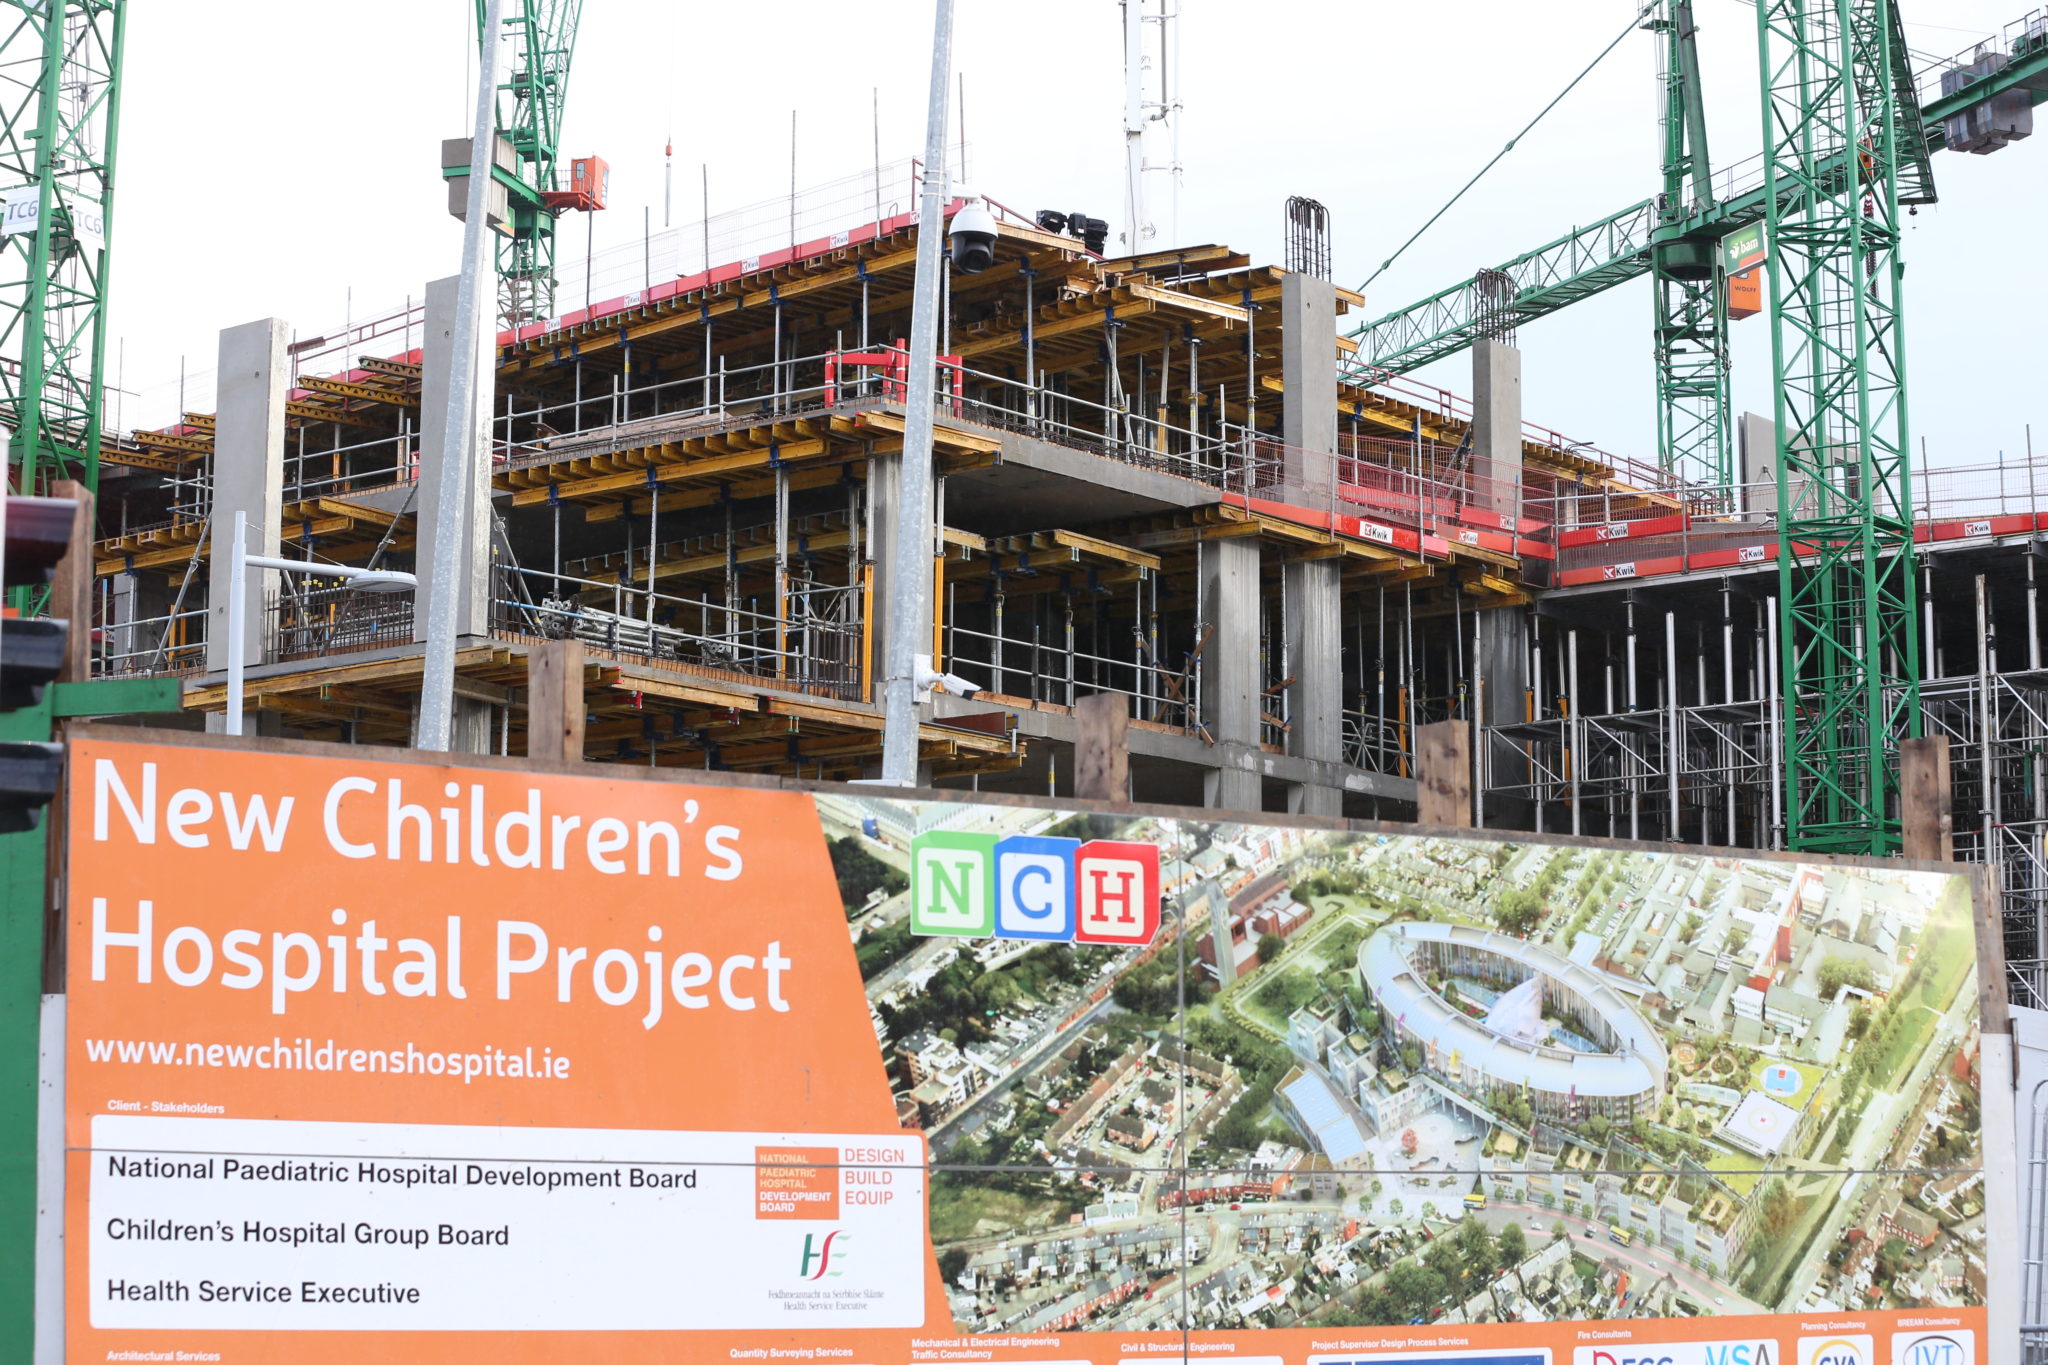 Pictured in November 2020 are building works taking place on the site of the new National Children’s Hospital in Dublin.